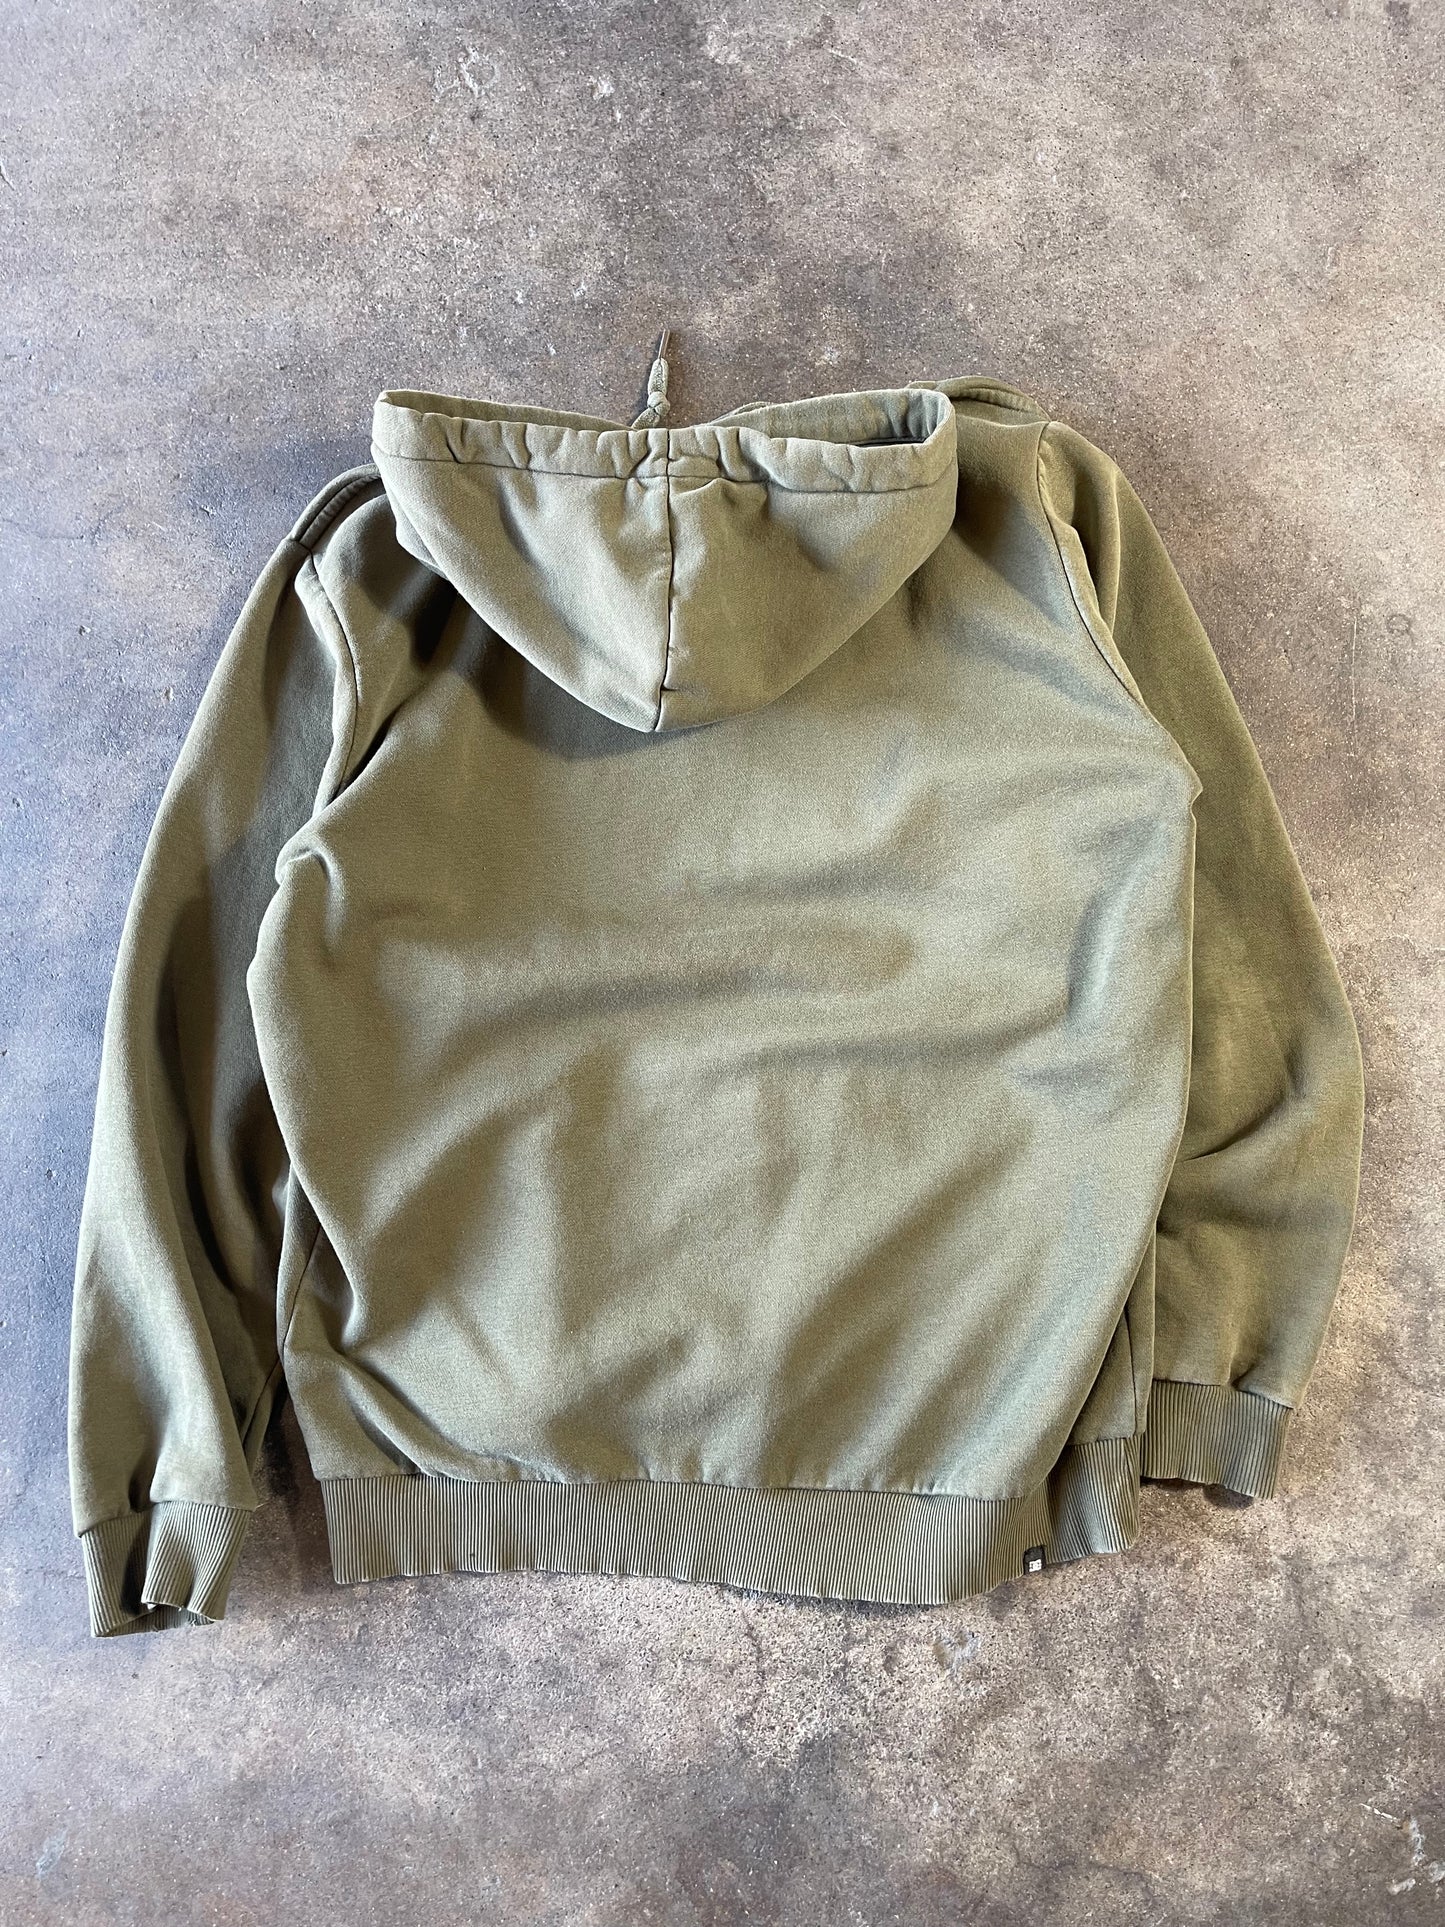 00’s Olive Green DC Hoodie XL